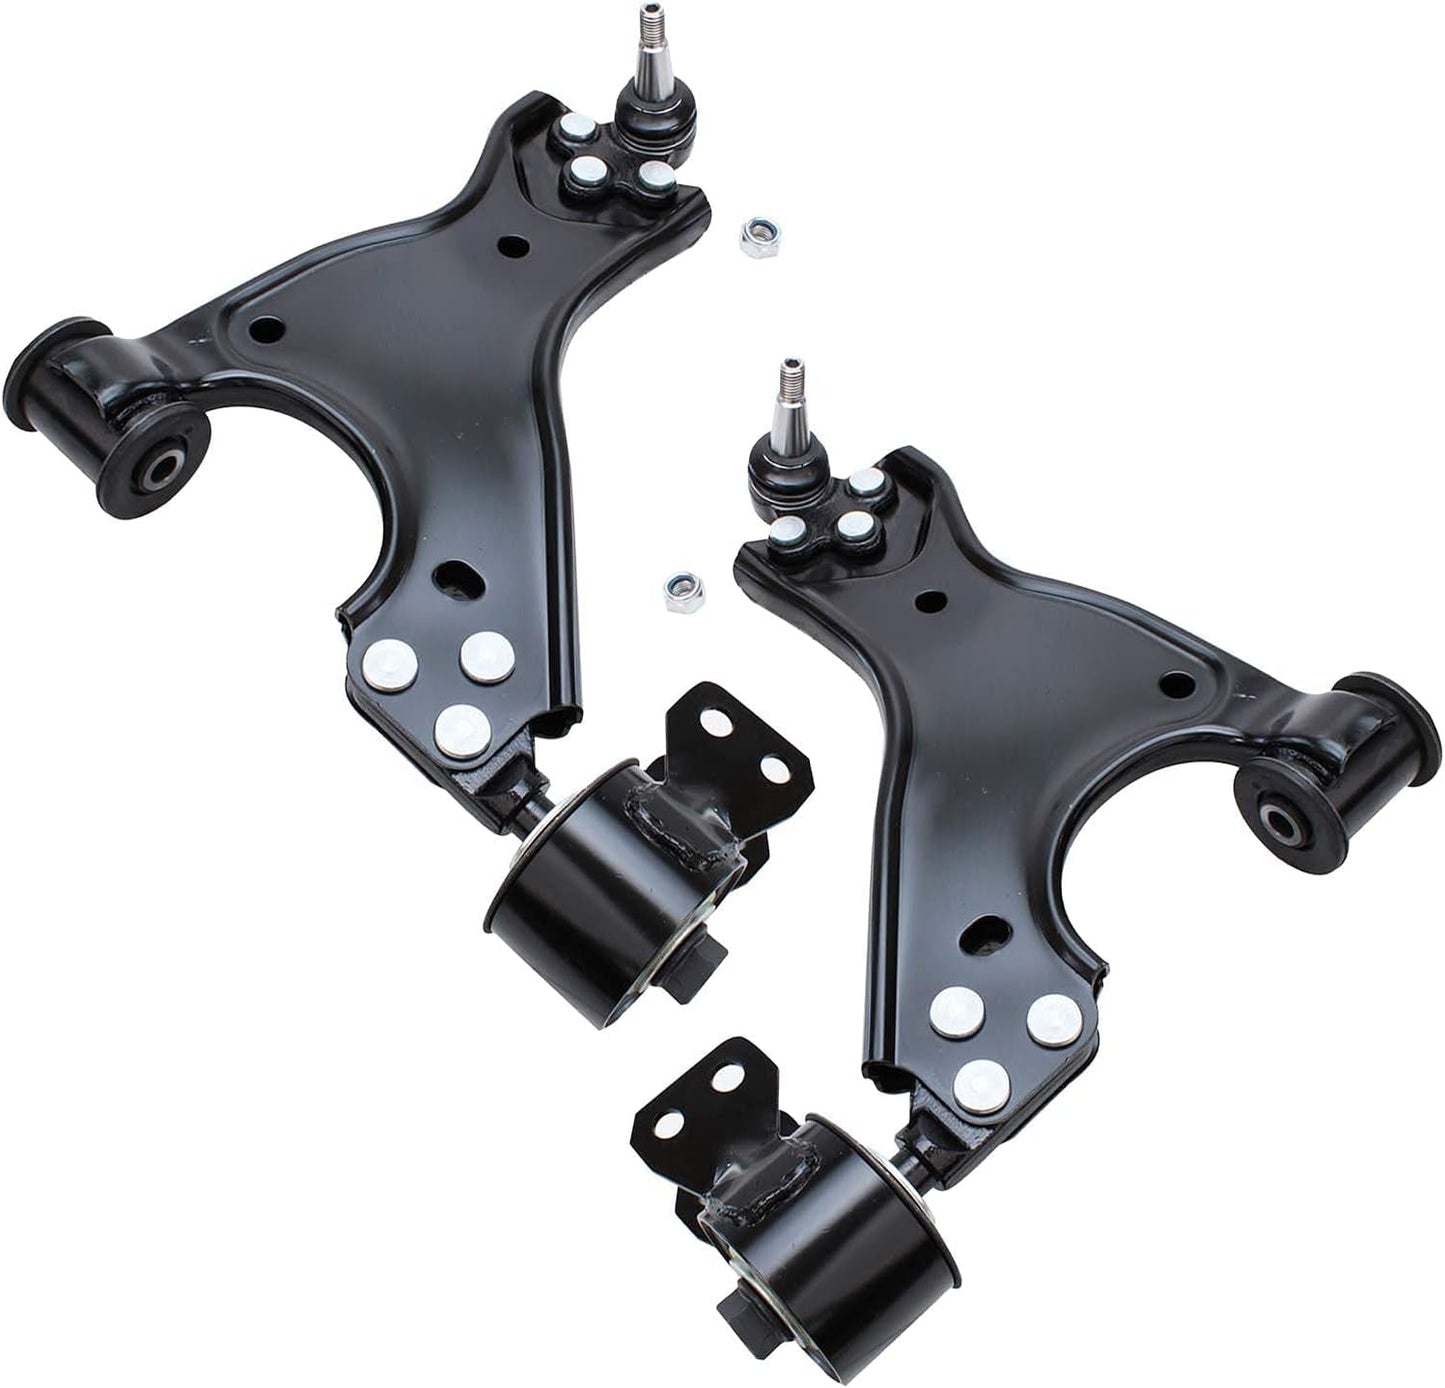 Detroit Axle - Front 6Pc Suspension Kit for 2008-2017 Buick Enclave Chevy Traverse 2007-2016 Acadia Saturn Outlook 2 Lower Control Arms with Ball Joints 2 Sway Bars 2 Outer Tie Rods Replacement